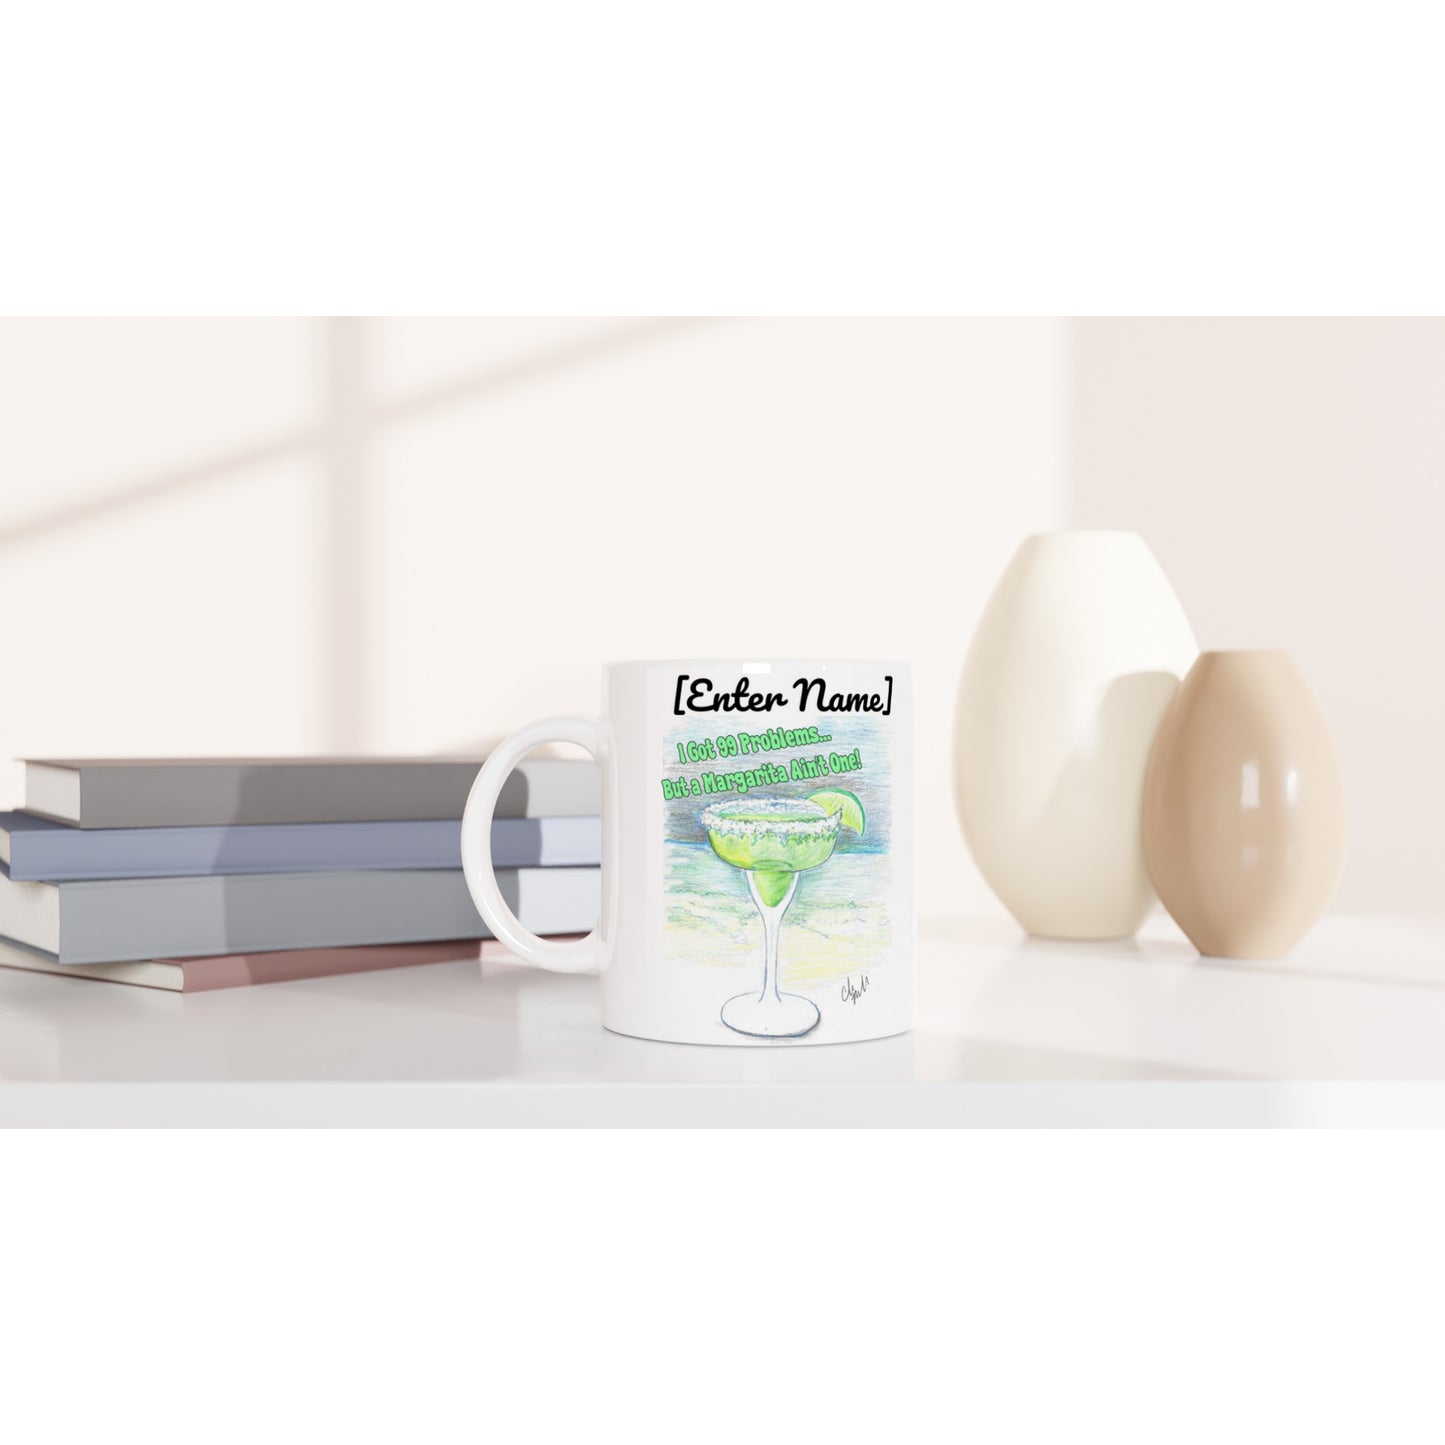 Personalized white ceramic 11oz mug with motto I Got 99 Problems But a Margarita Aint One on the front and WhatYa Say logo on the back  dishwasher and microwave safe from WhatYa Say Apparel sitting on coffee table with books and two vases.